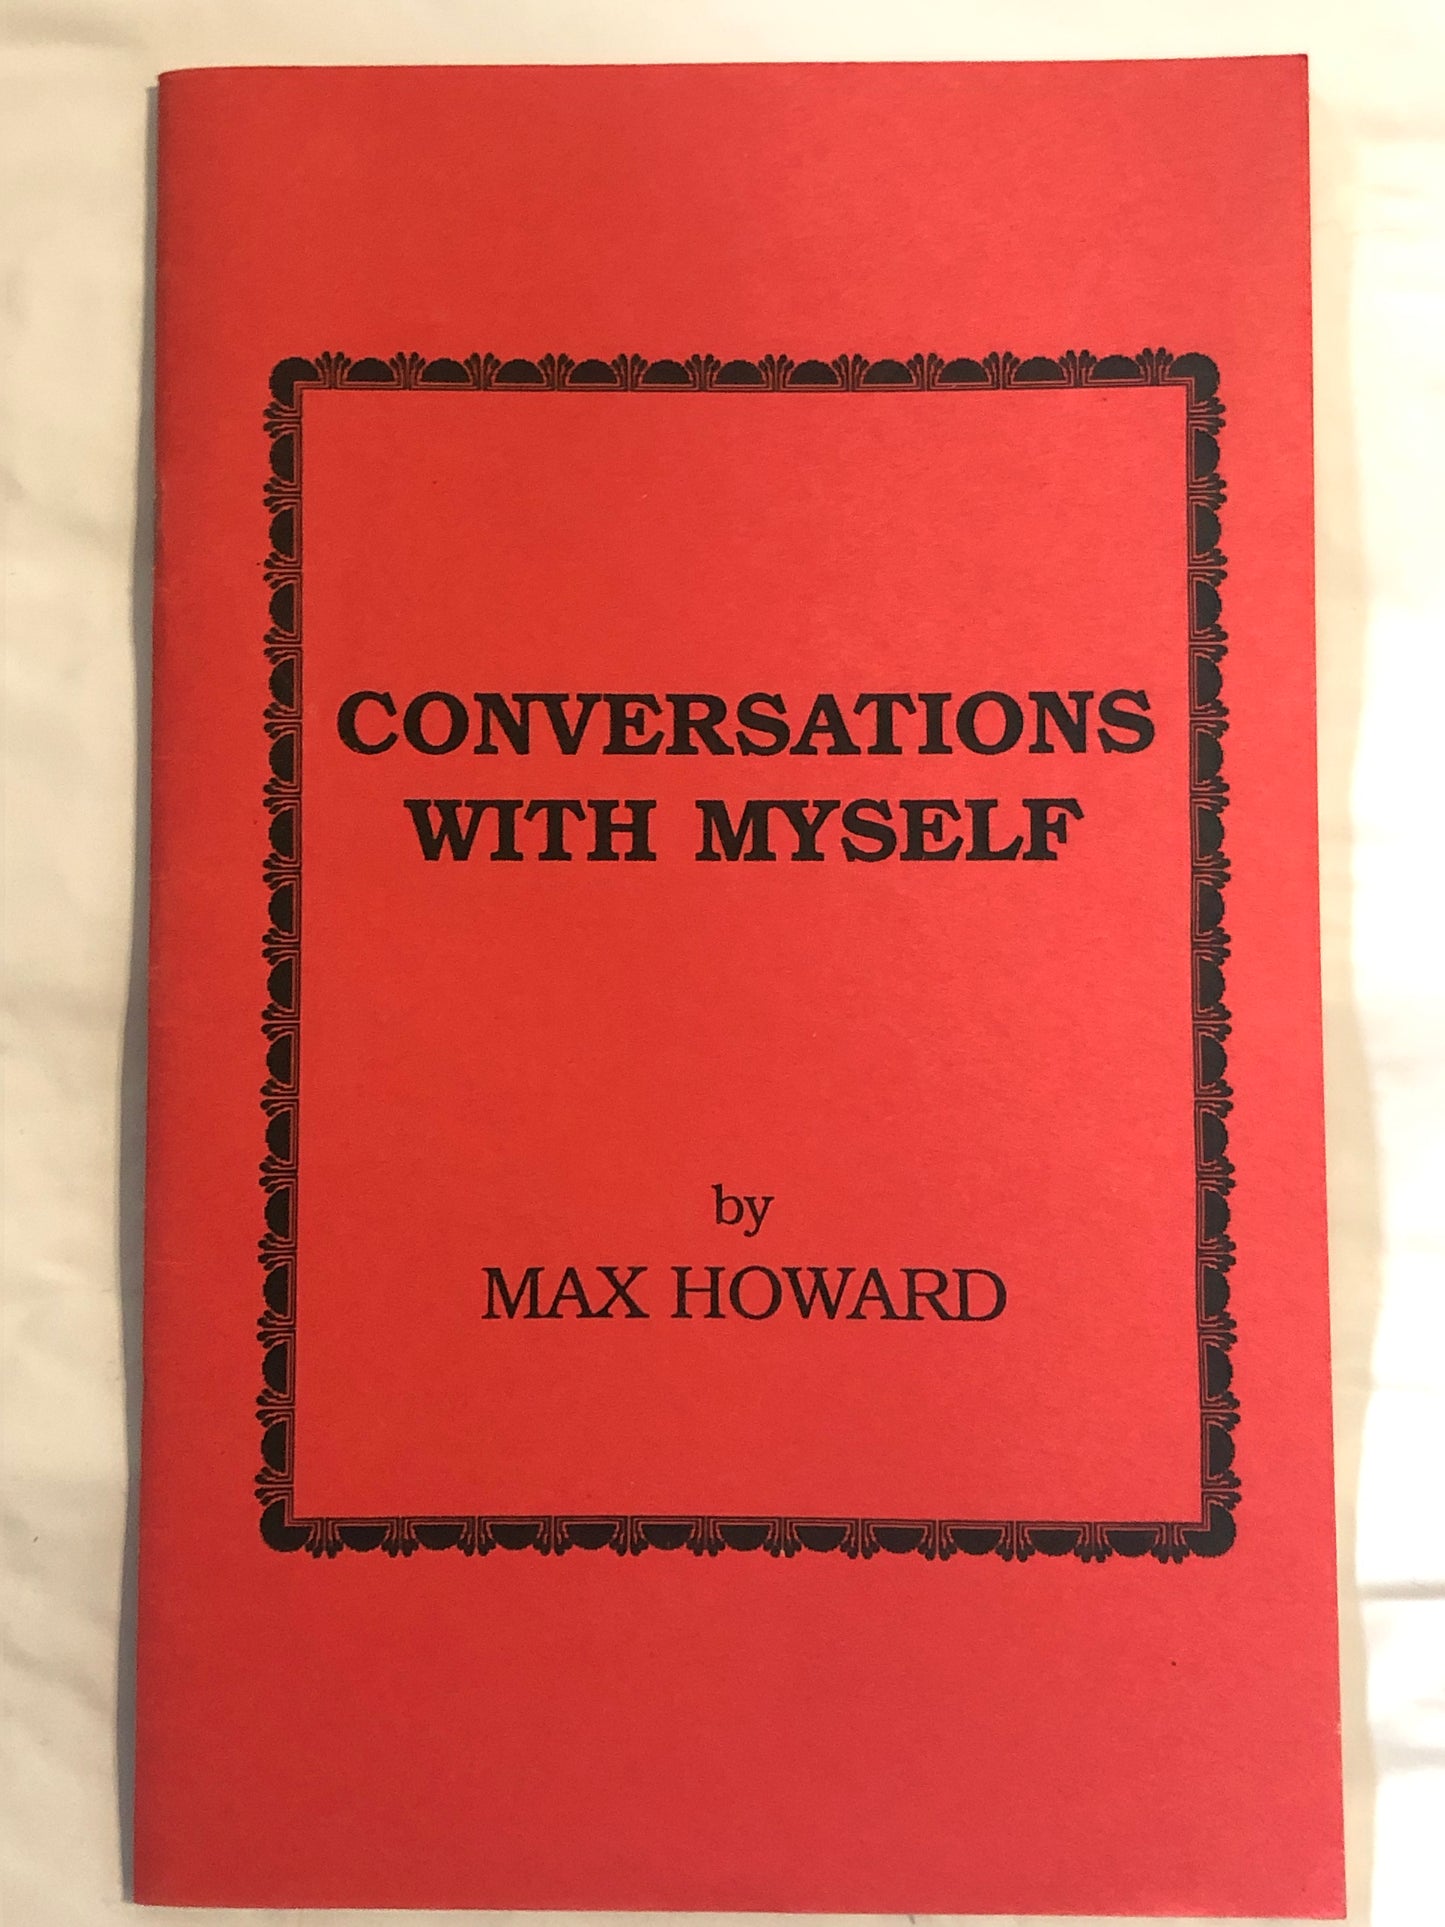 Conversations With Myself - Max Howard